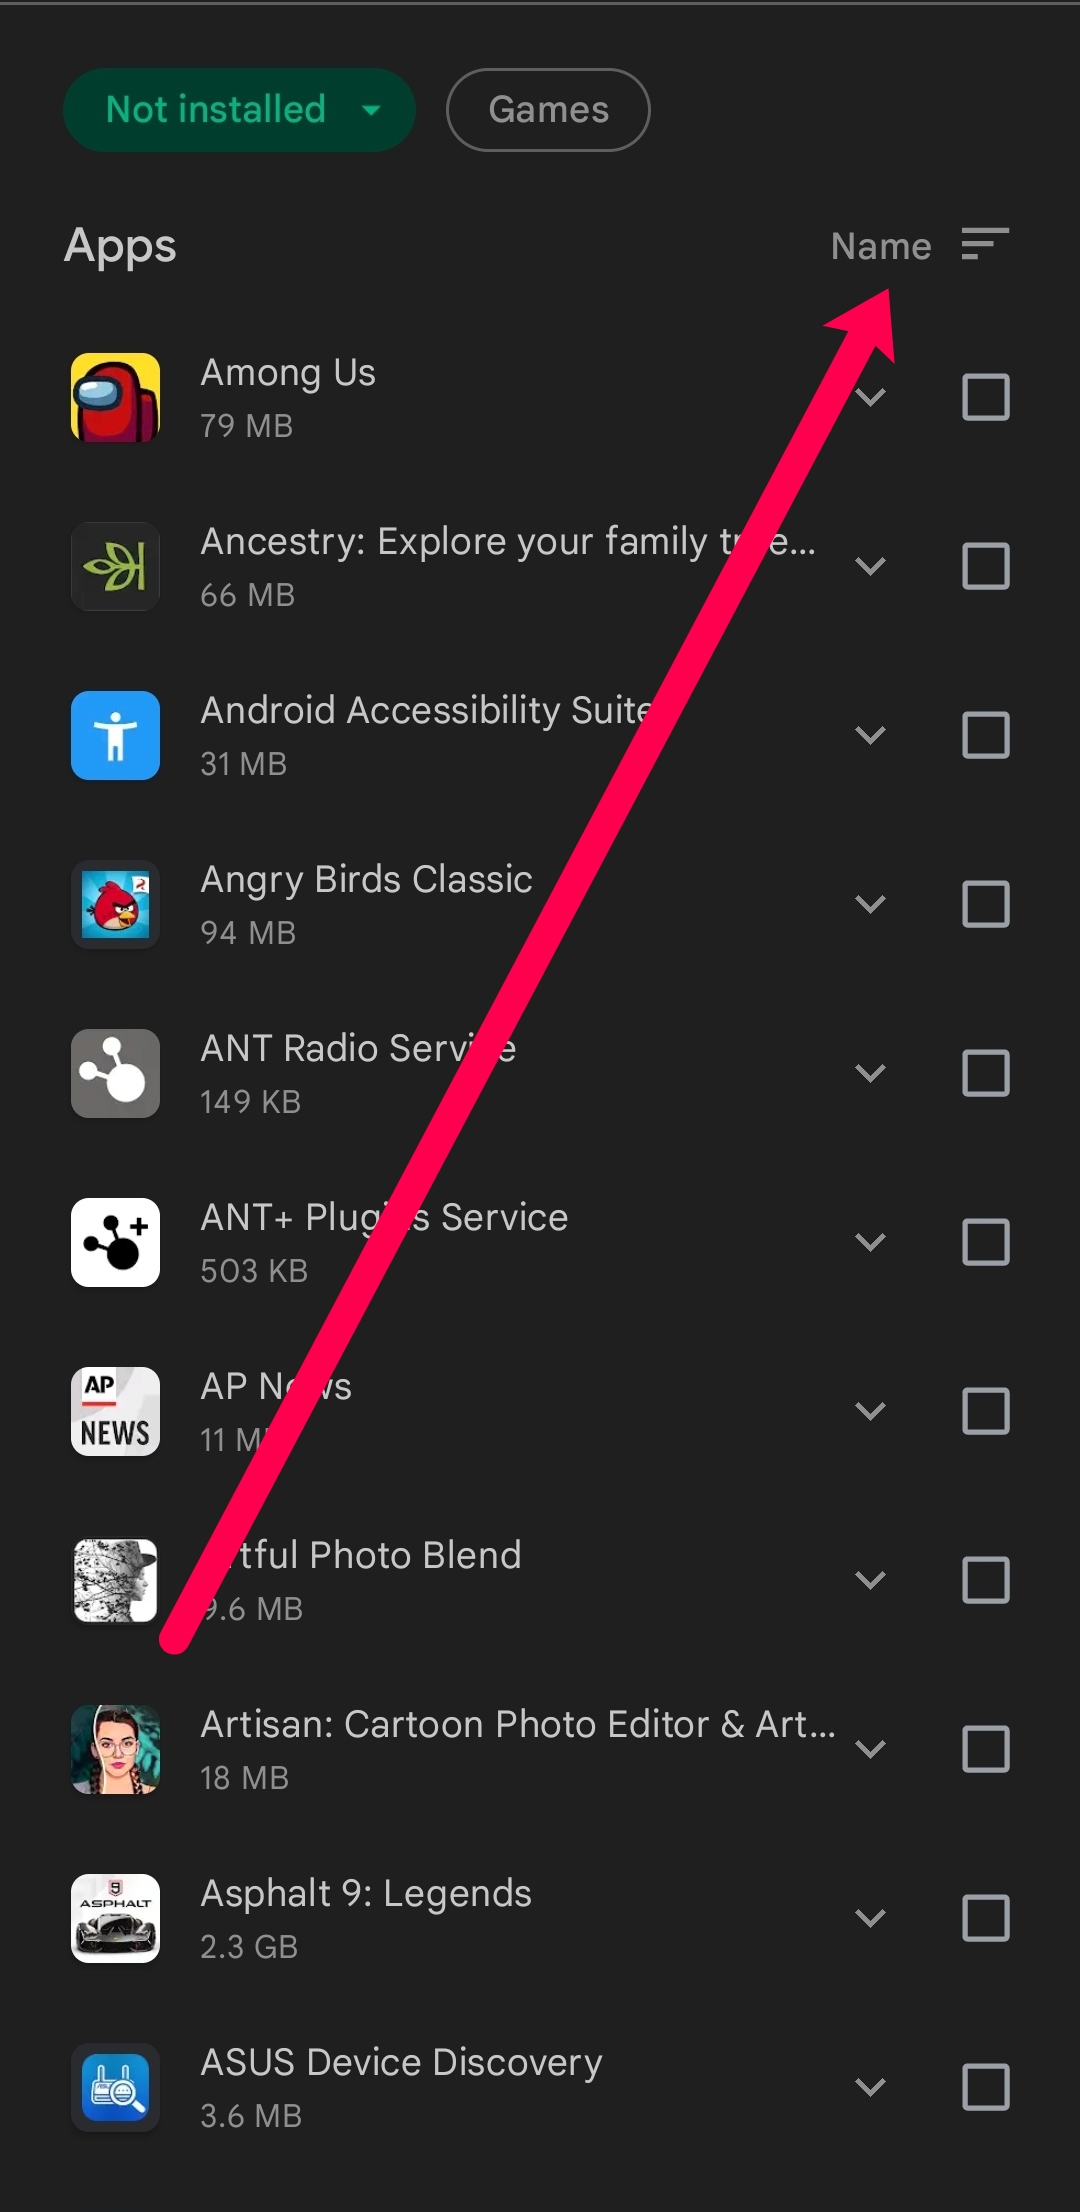 Go back to "Settings" and select "Apps" or "Applications" again.
Find the disabled app and tap on it.